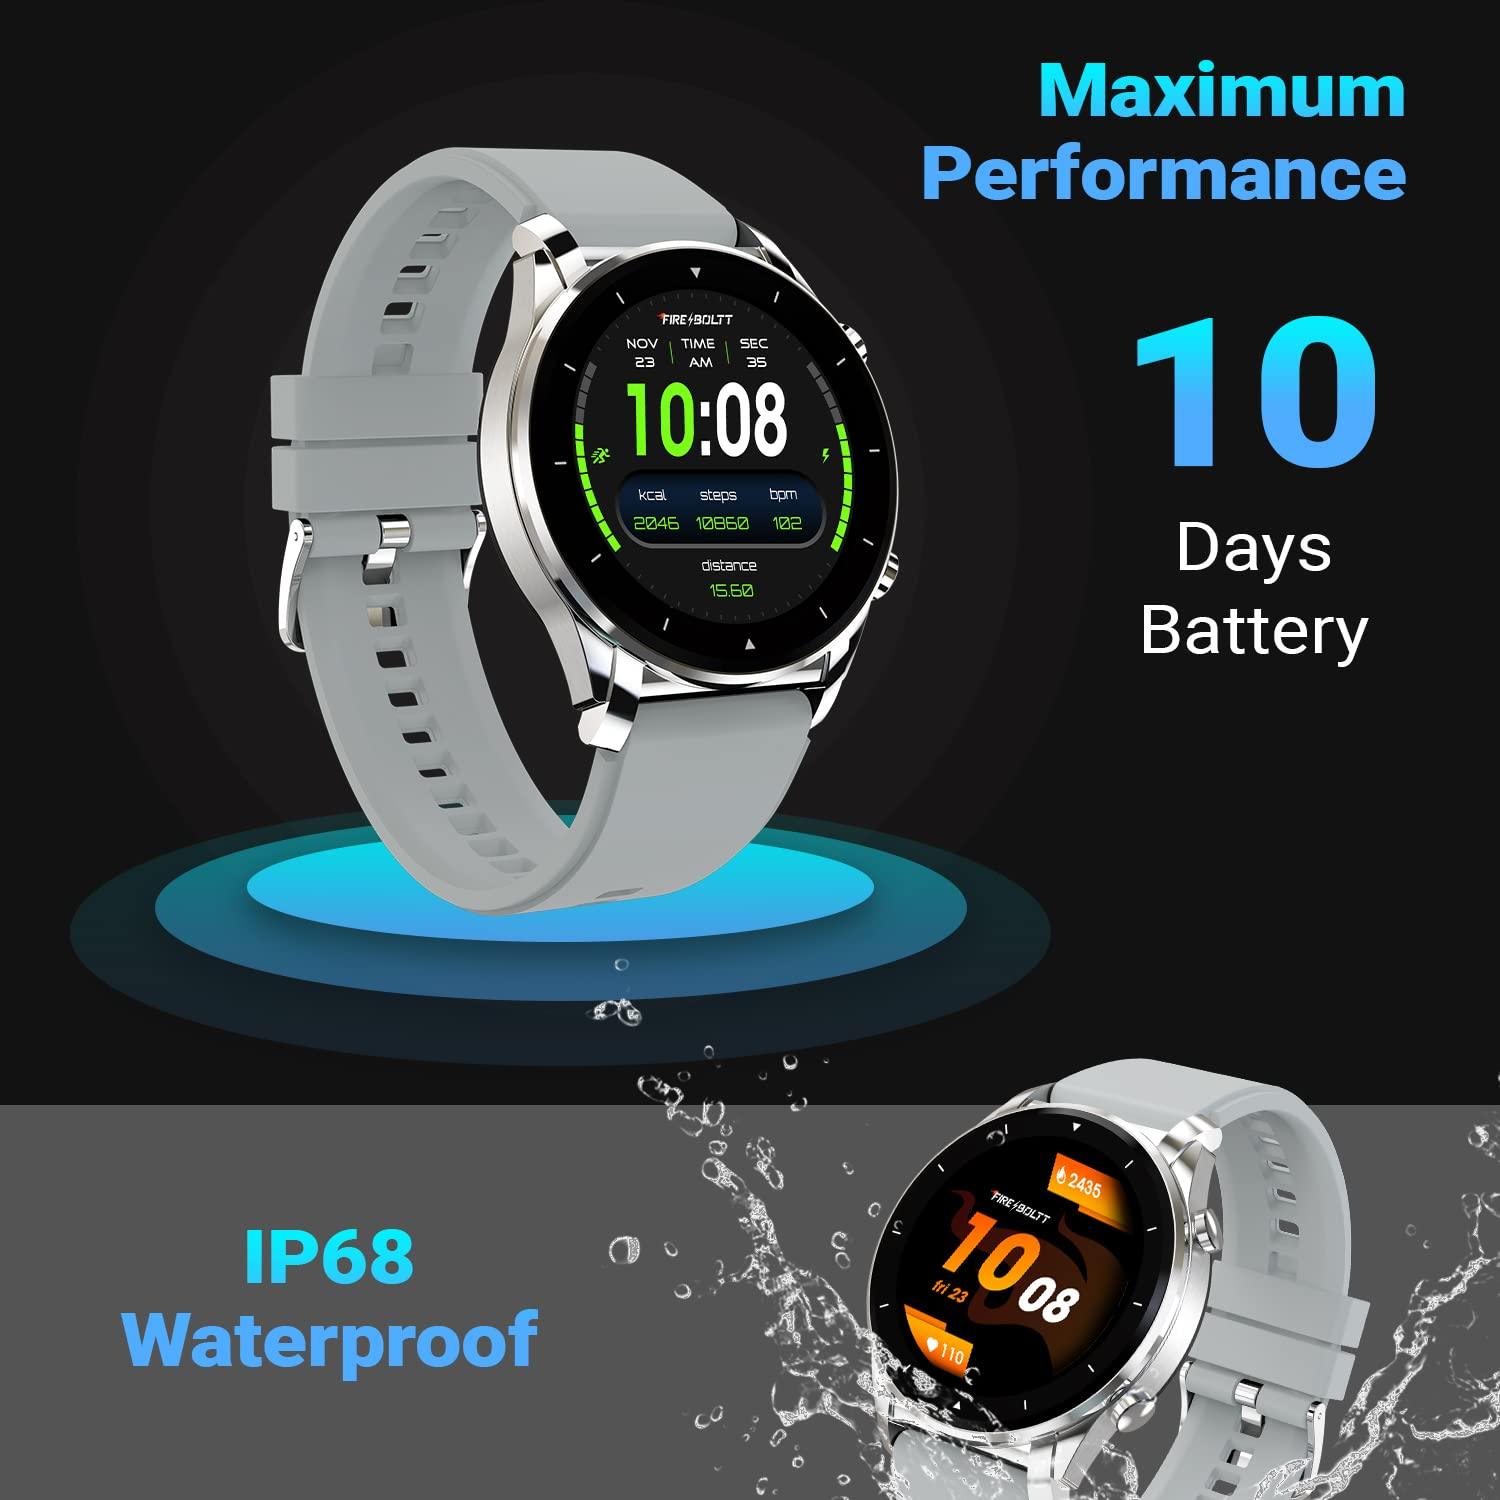 Fire-Boltt Thunder Bluetooth Calling Full Touch 1.32inch Amoled LCD Smartwatch with SpO2, Heart Rate & Sleep Monitoring, 30 Sports Modes Silver - onBeli